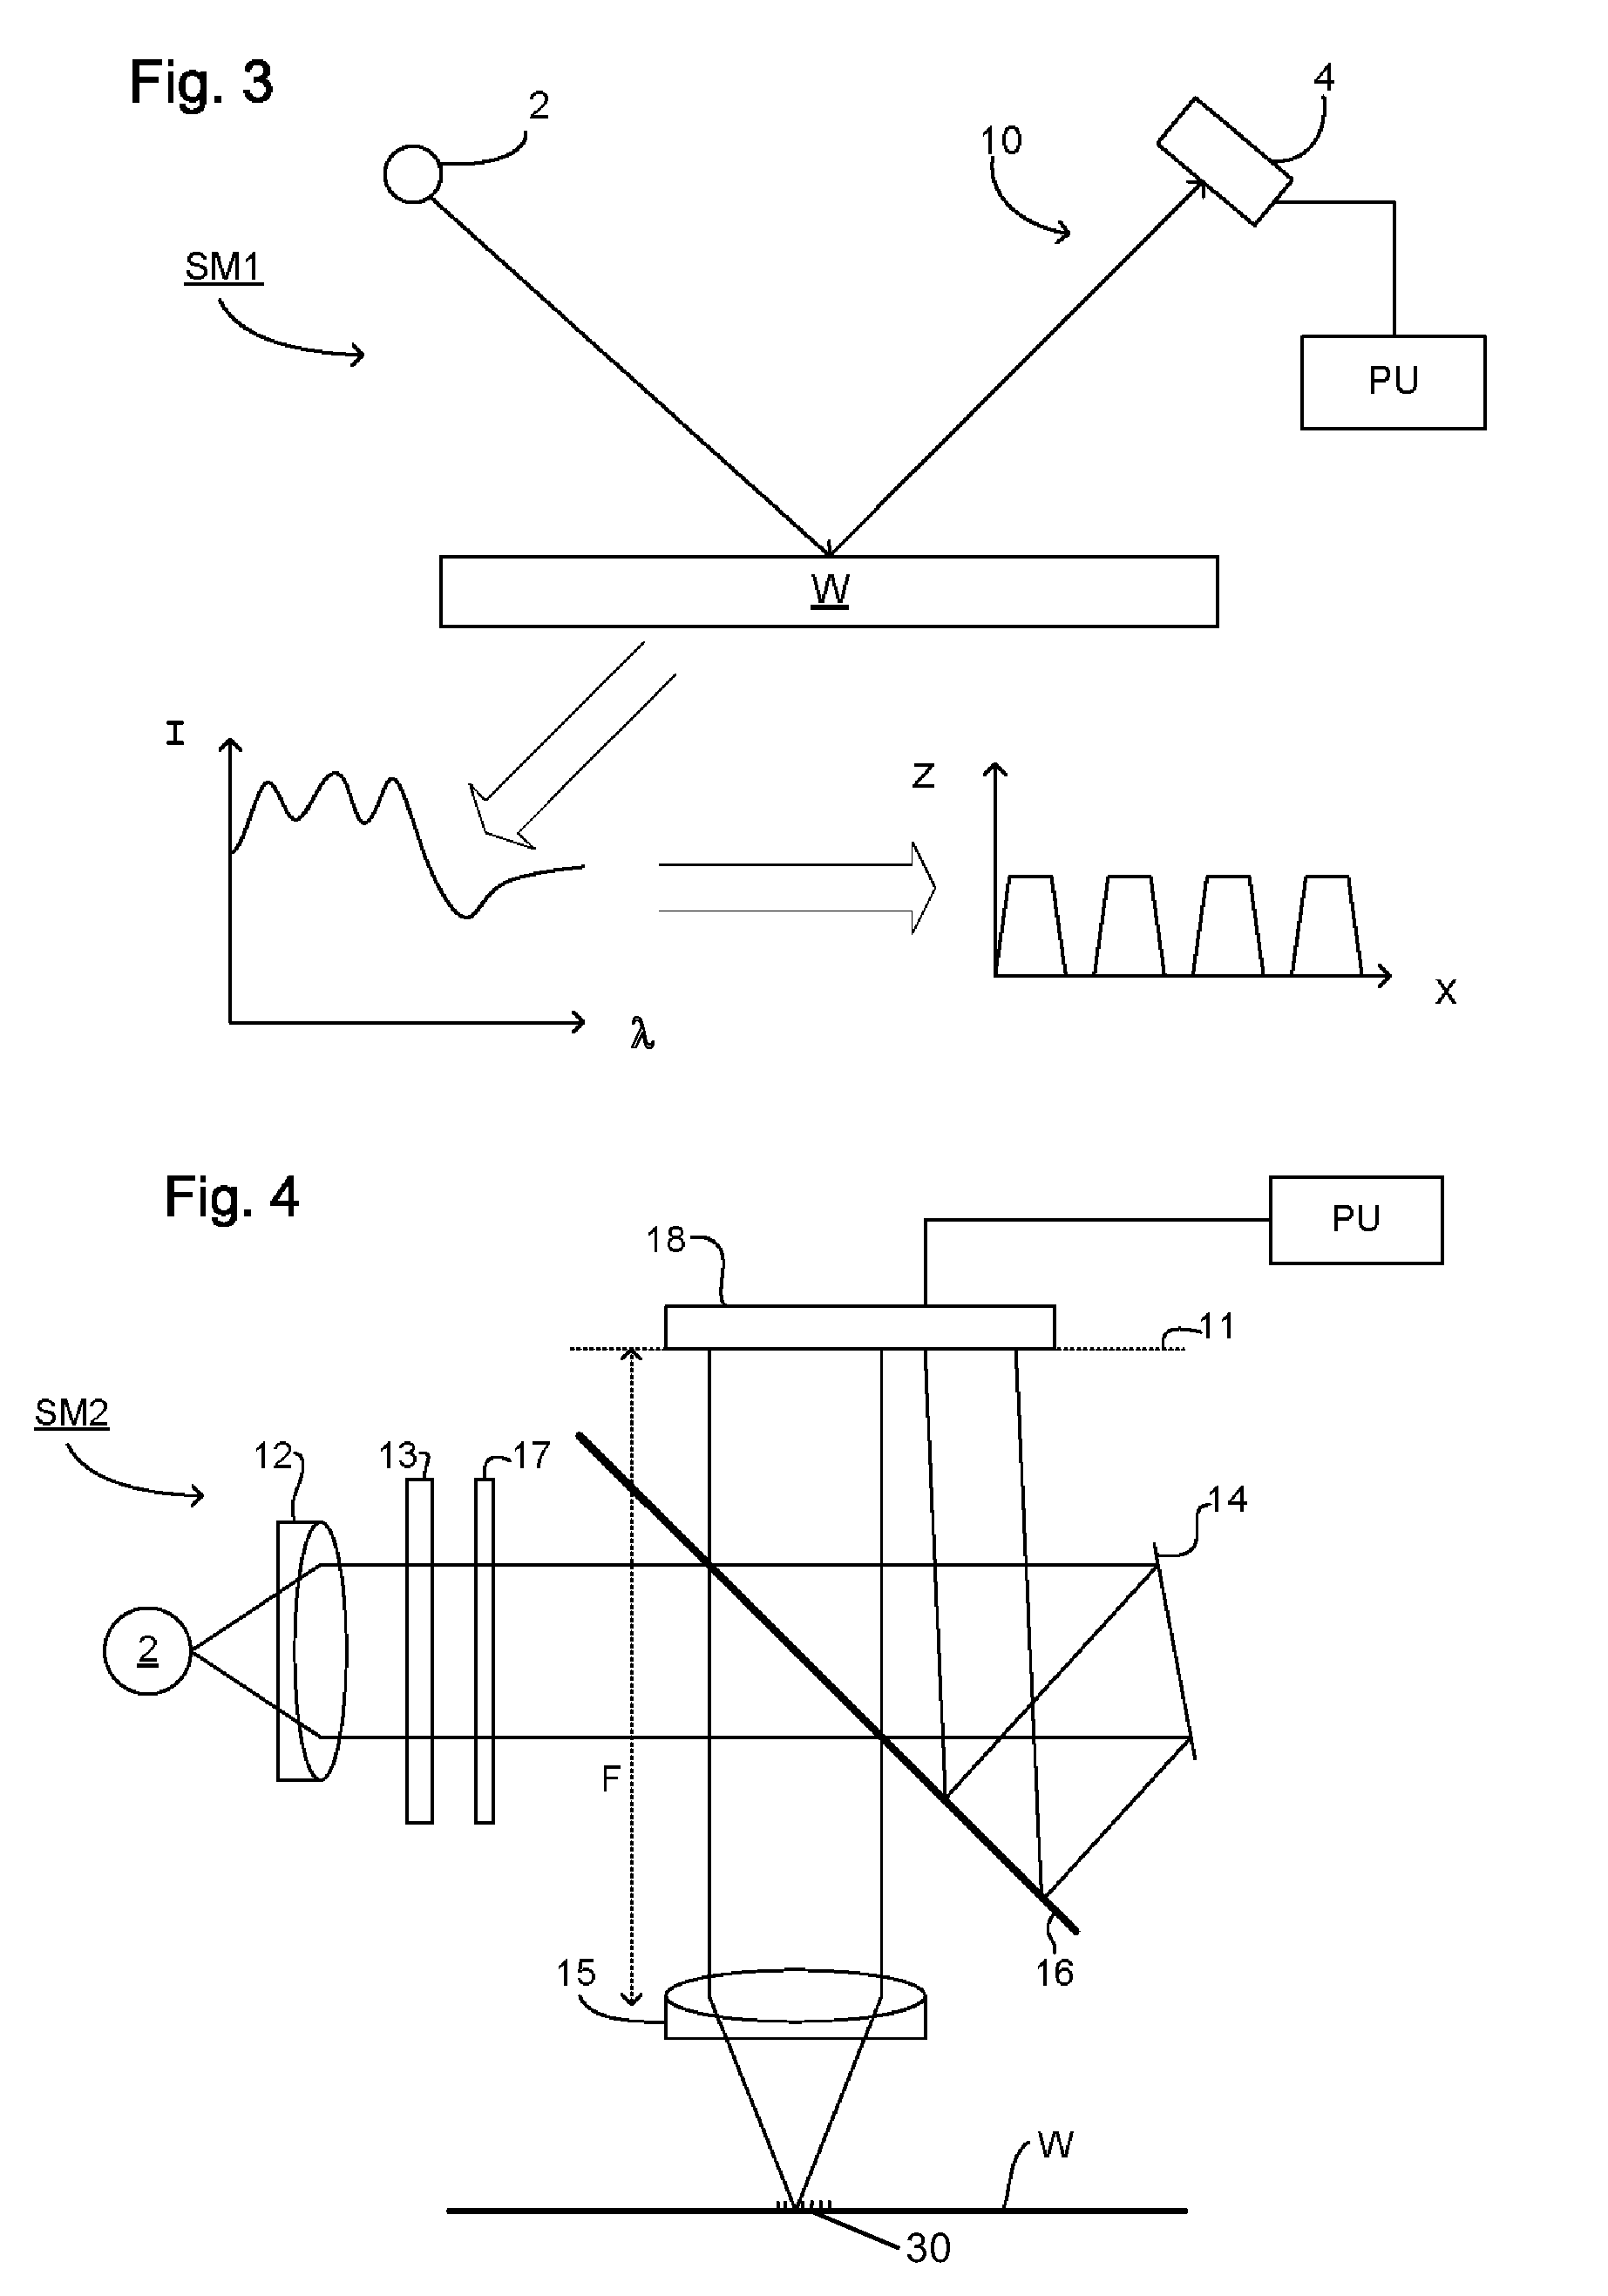 Producing a Marker Pattern and Measurement of an Exposure-Related Property of an Exposure Apparatus